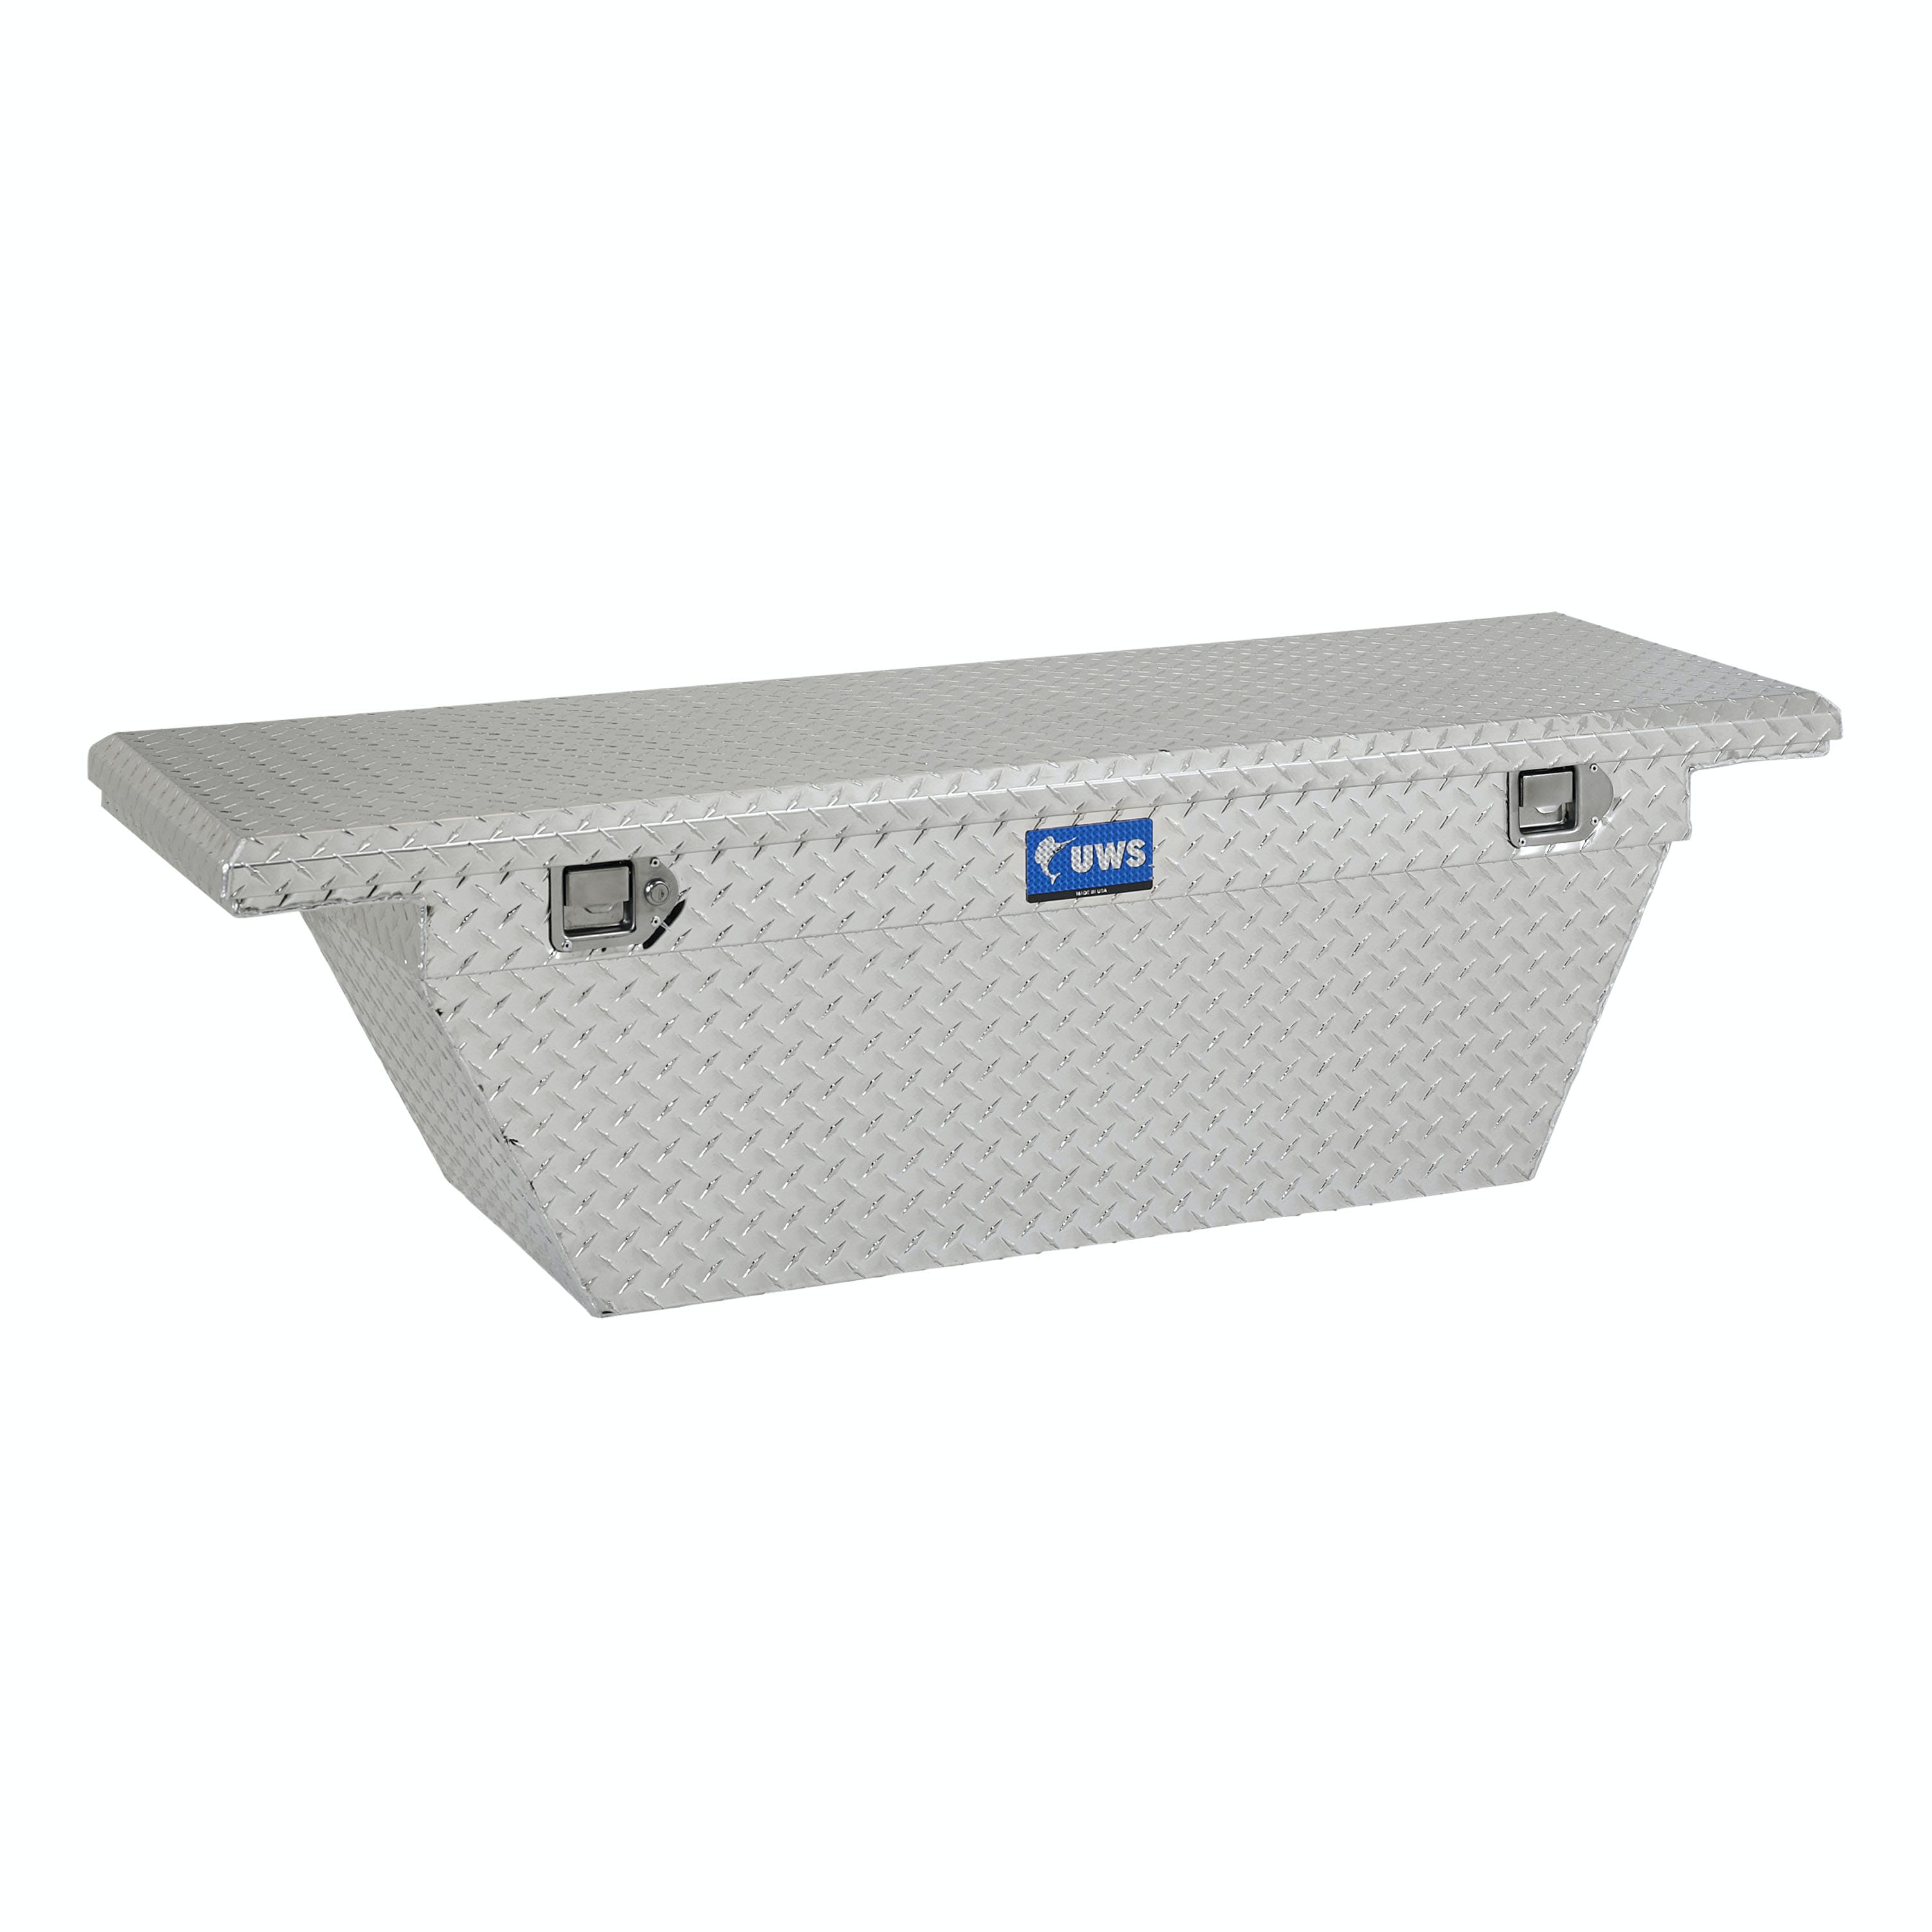 UWS TBSD-60A-LP 60 inch Aluminum Single Lid Crossover Toolbox Deep Angled Low Profile